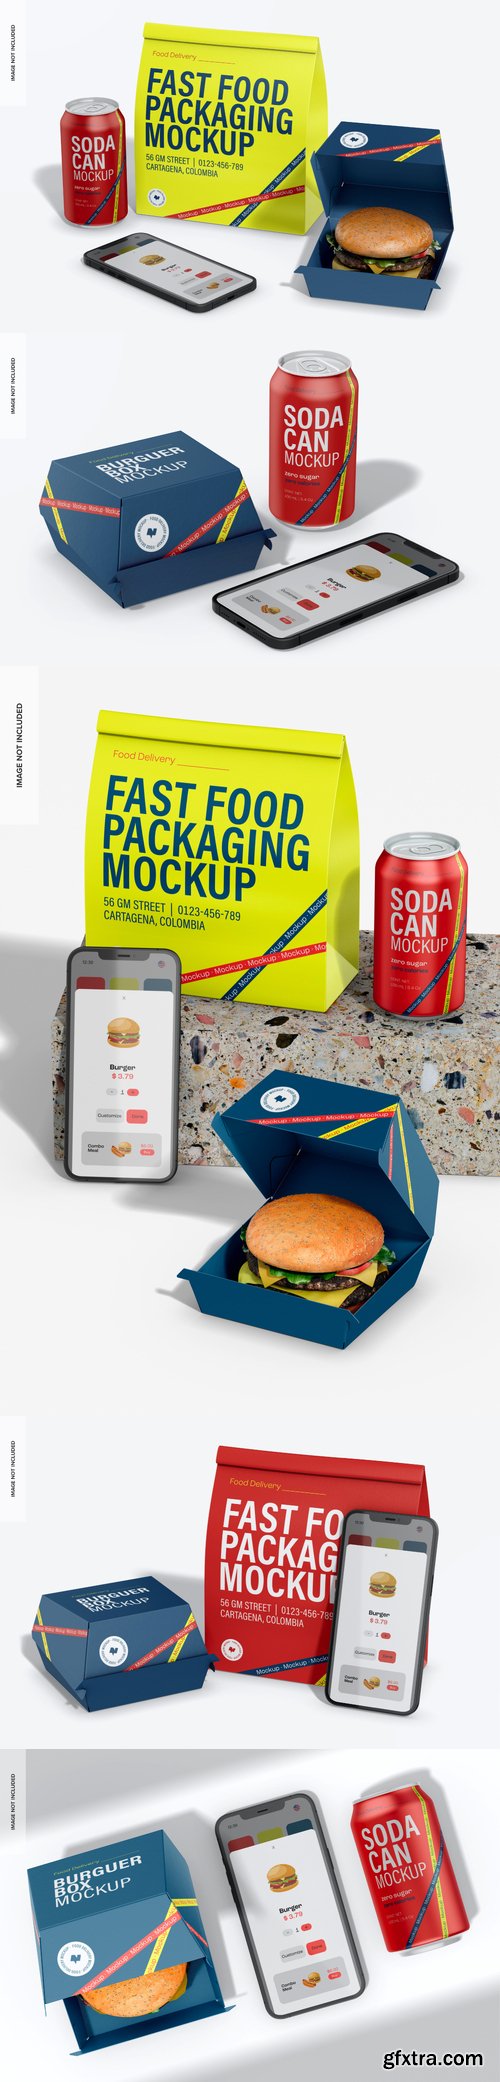 Smartphone with food packaging mockup